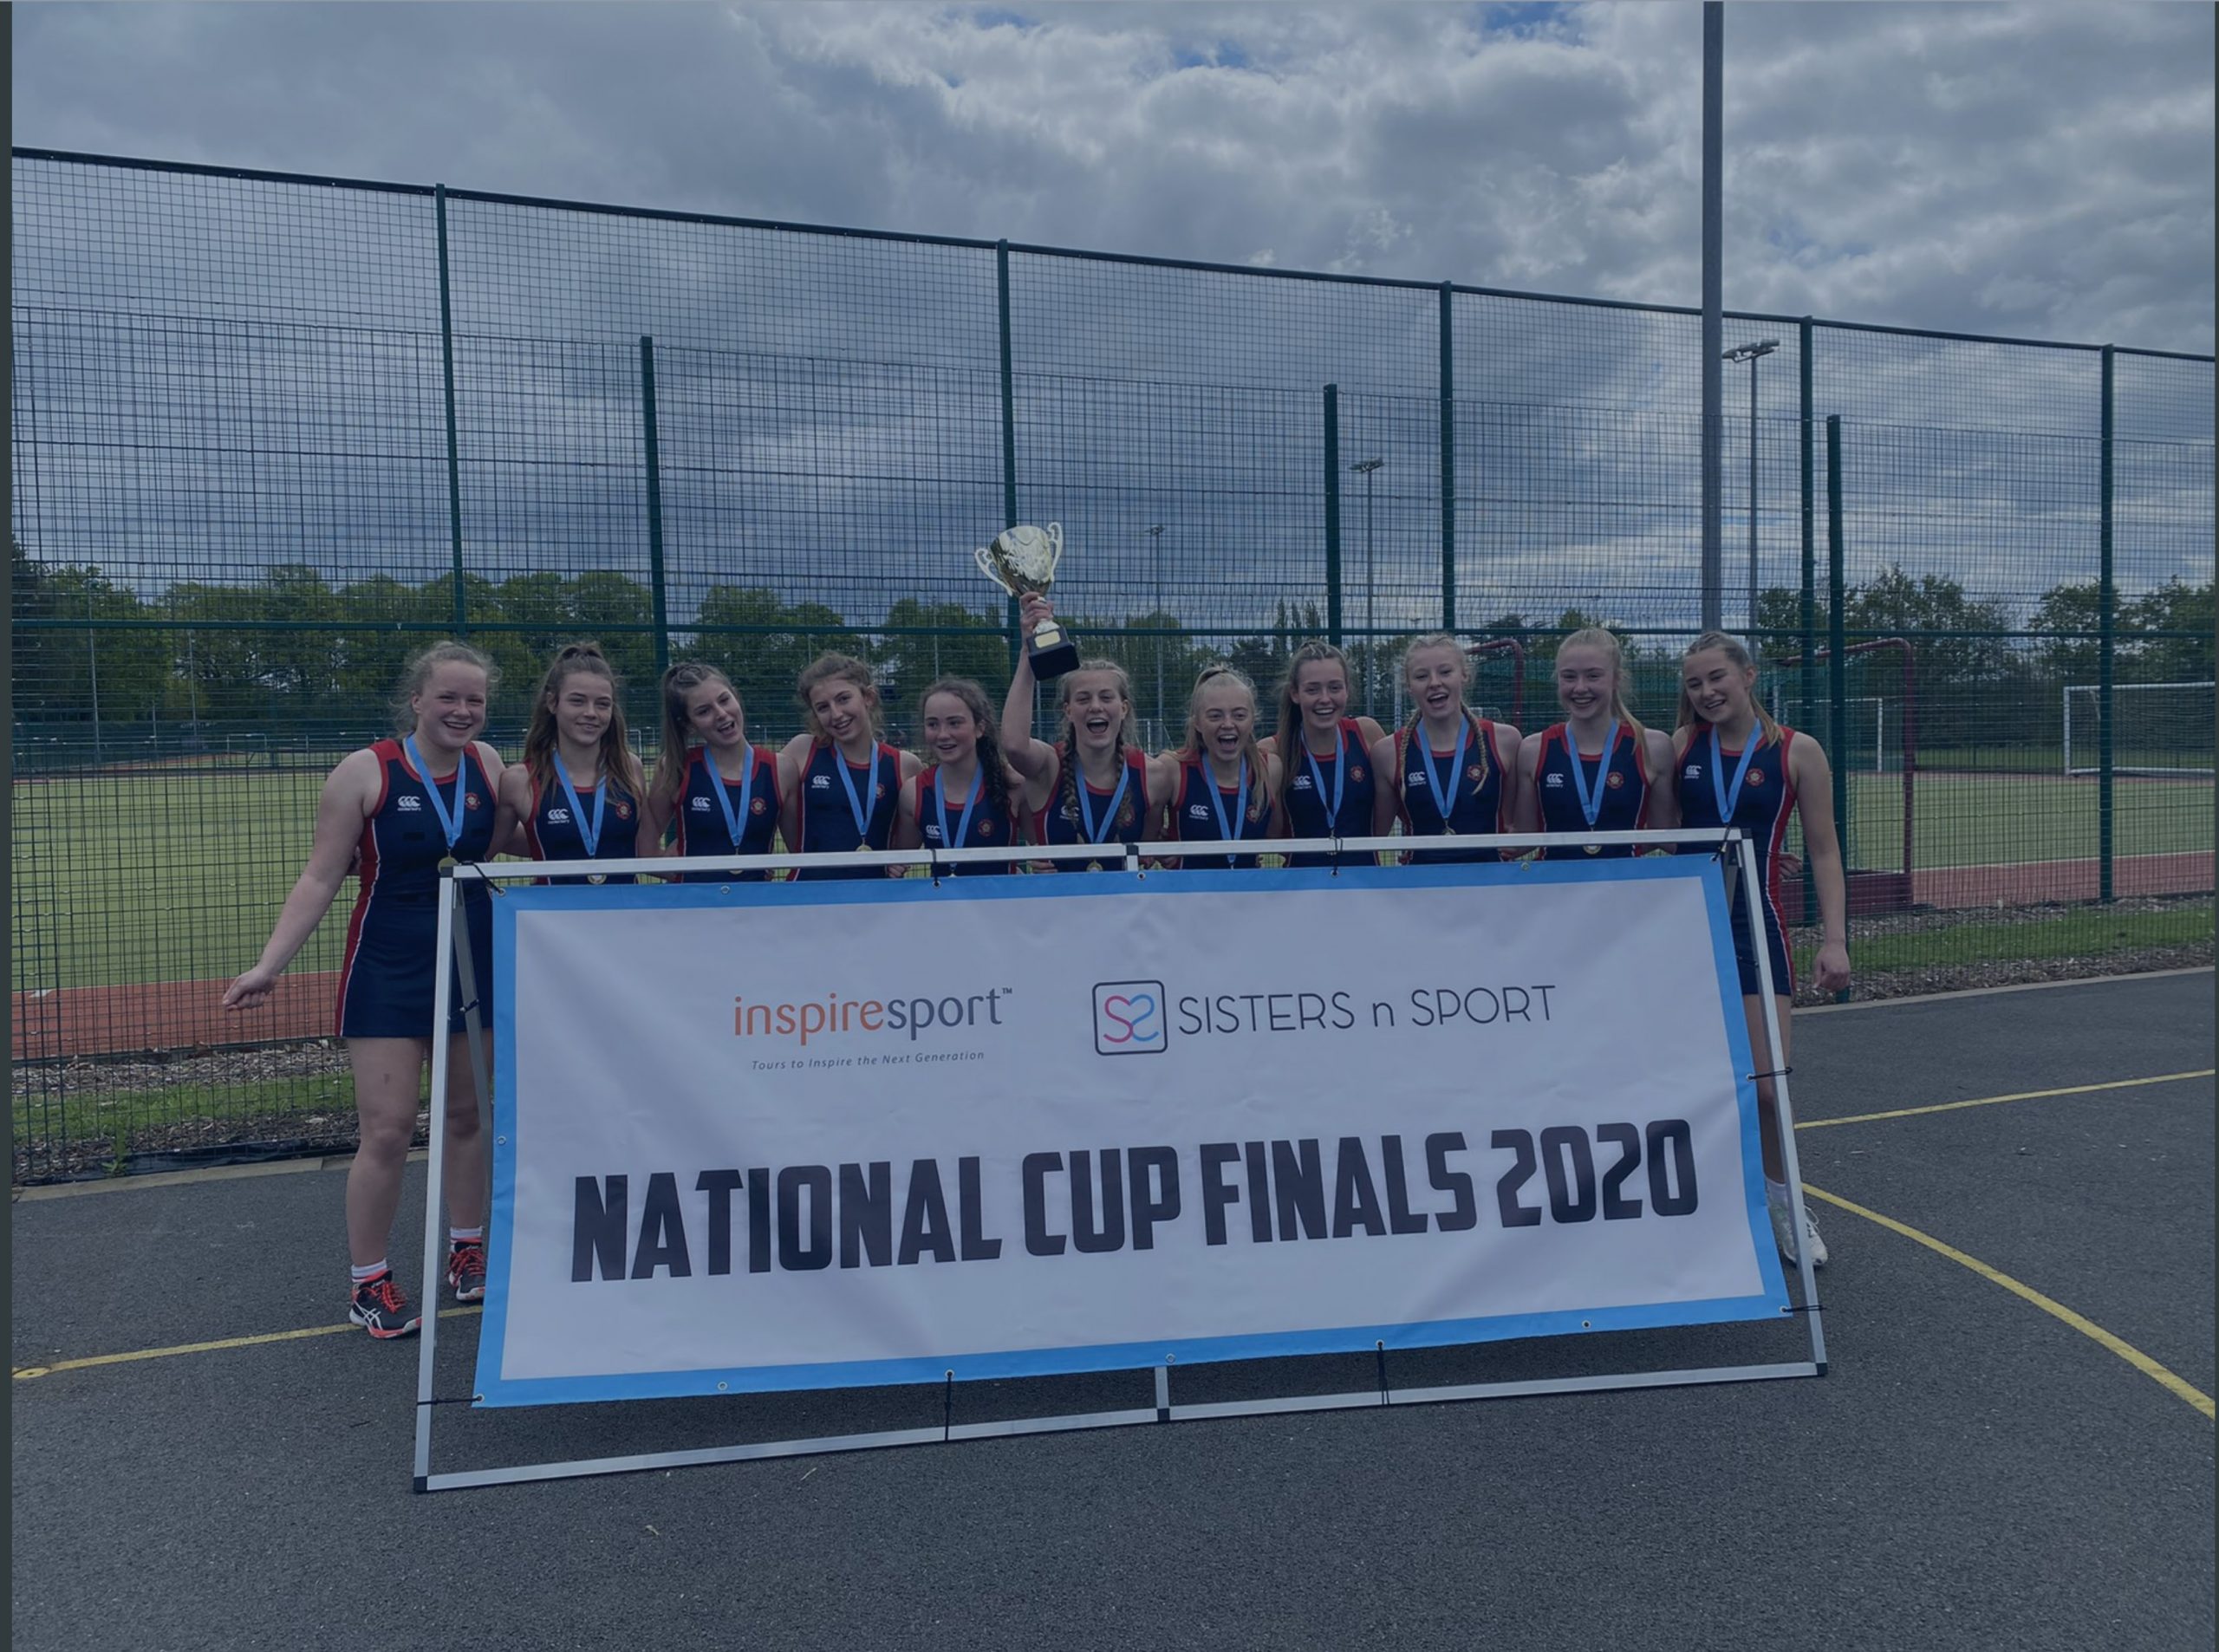 Double National Champions! Netballers rejoice and reflect upon a magnificent achievement